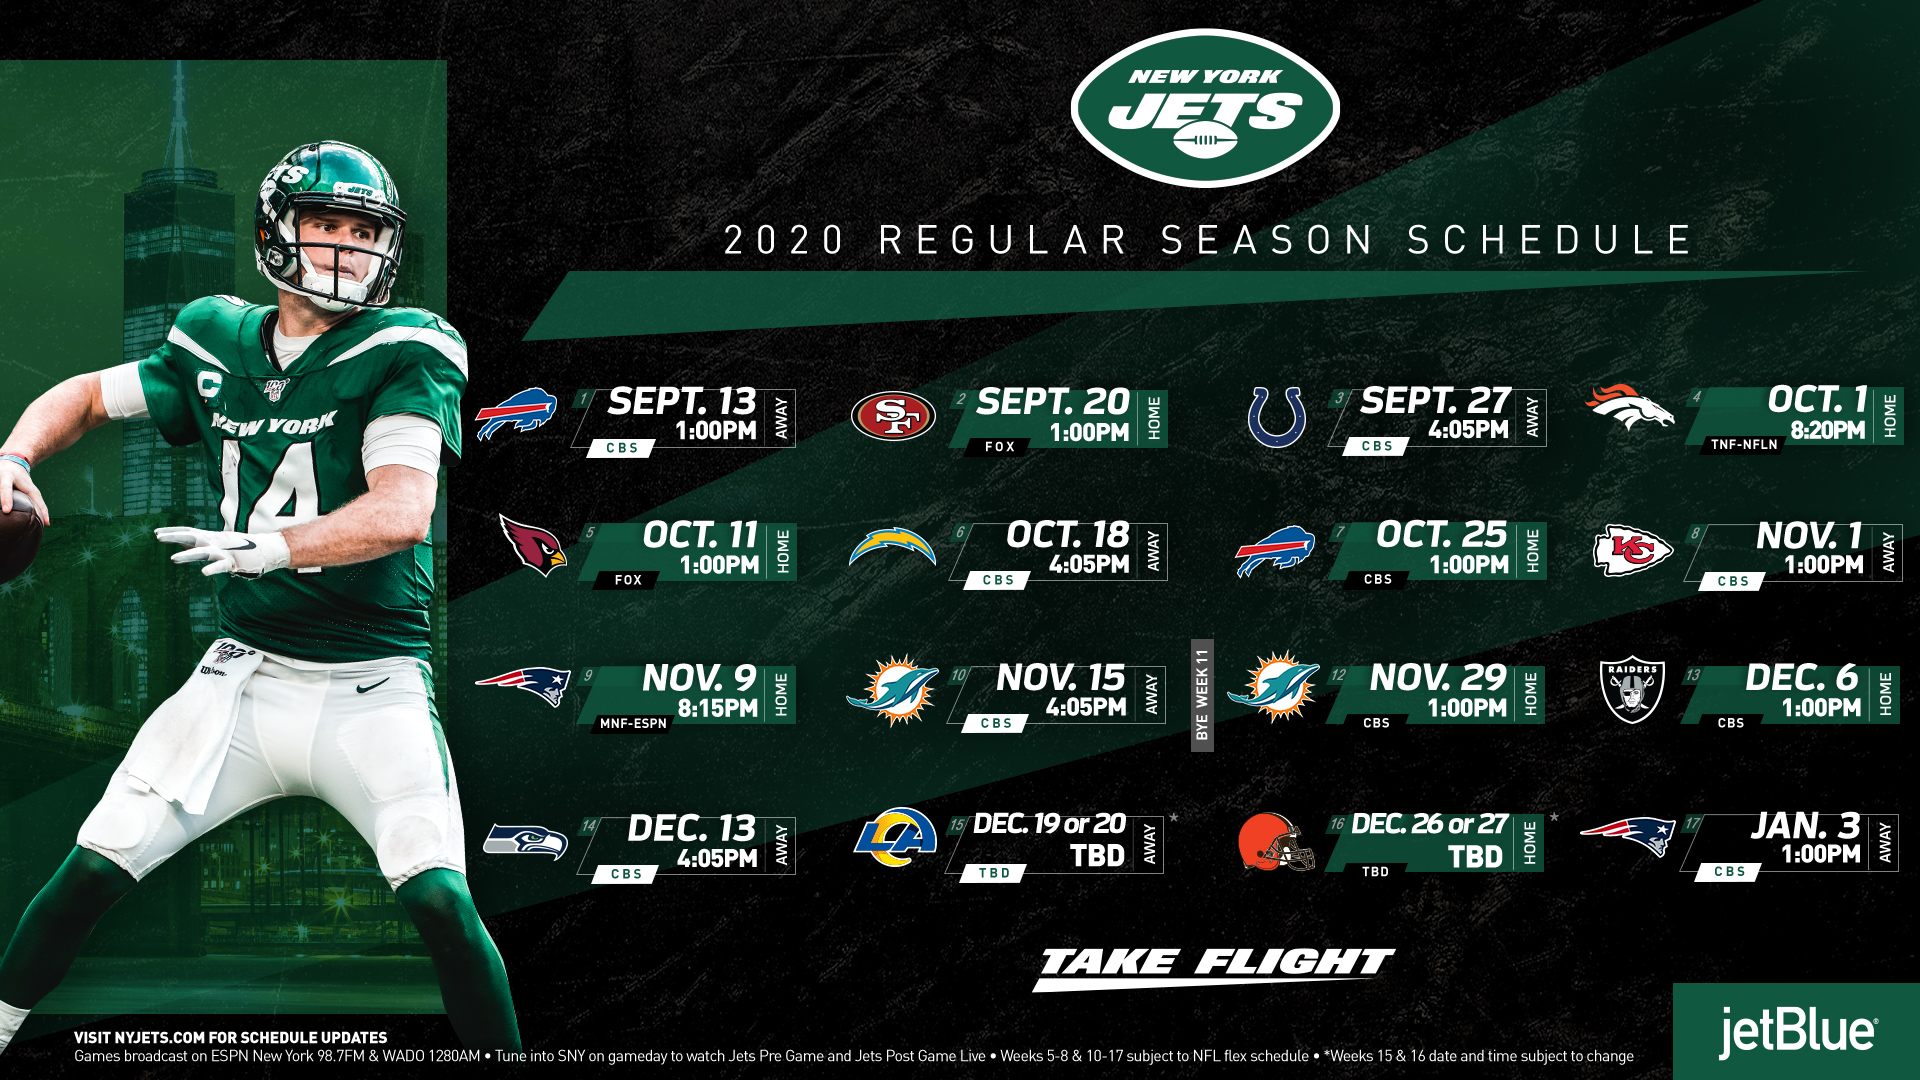 new york jets schedule for 2022